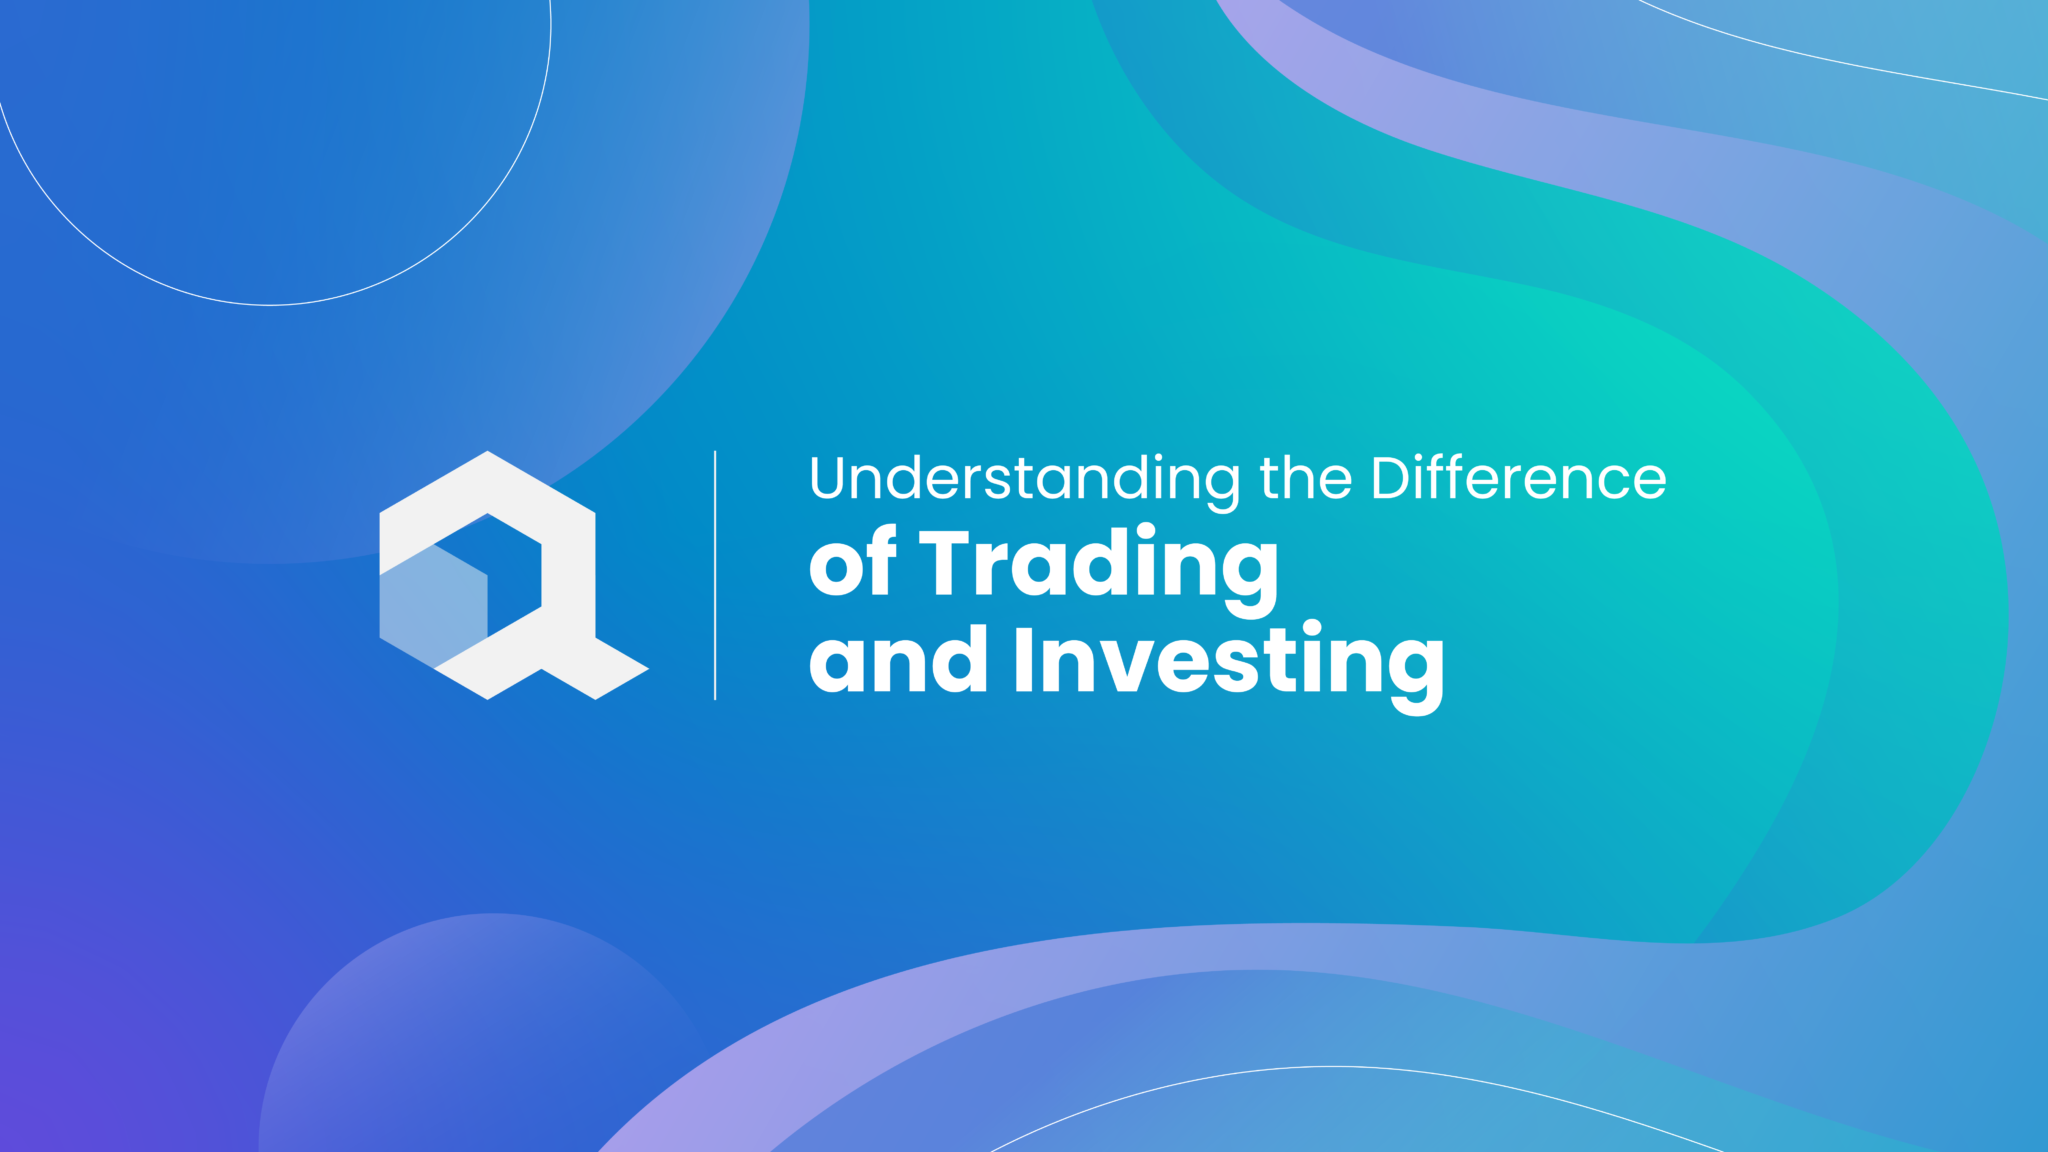 Trading and Investing: Is There a Difference?